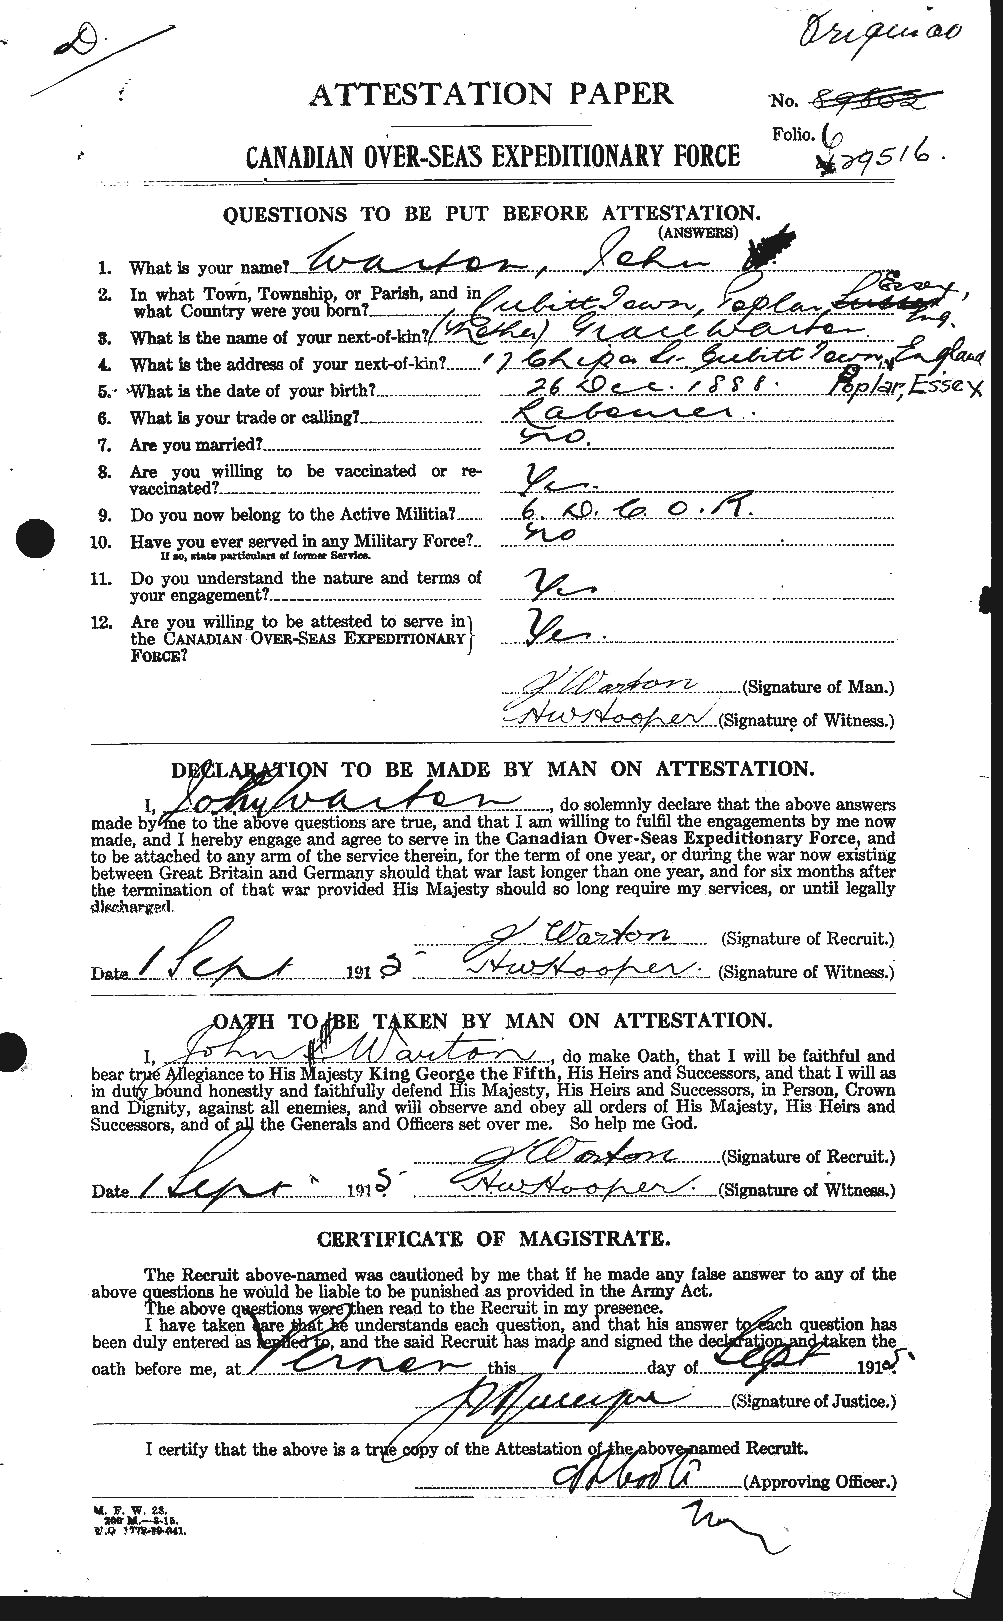 Personnel Records of the First World War - CEF 662610a